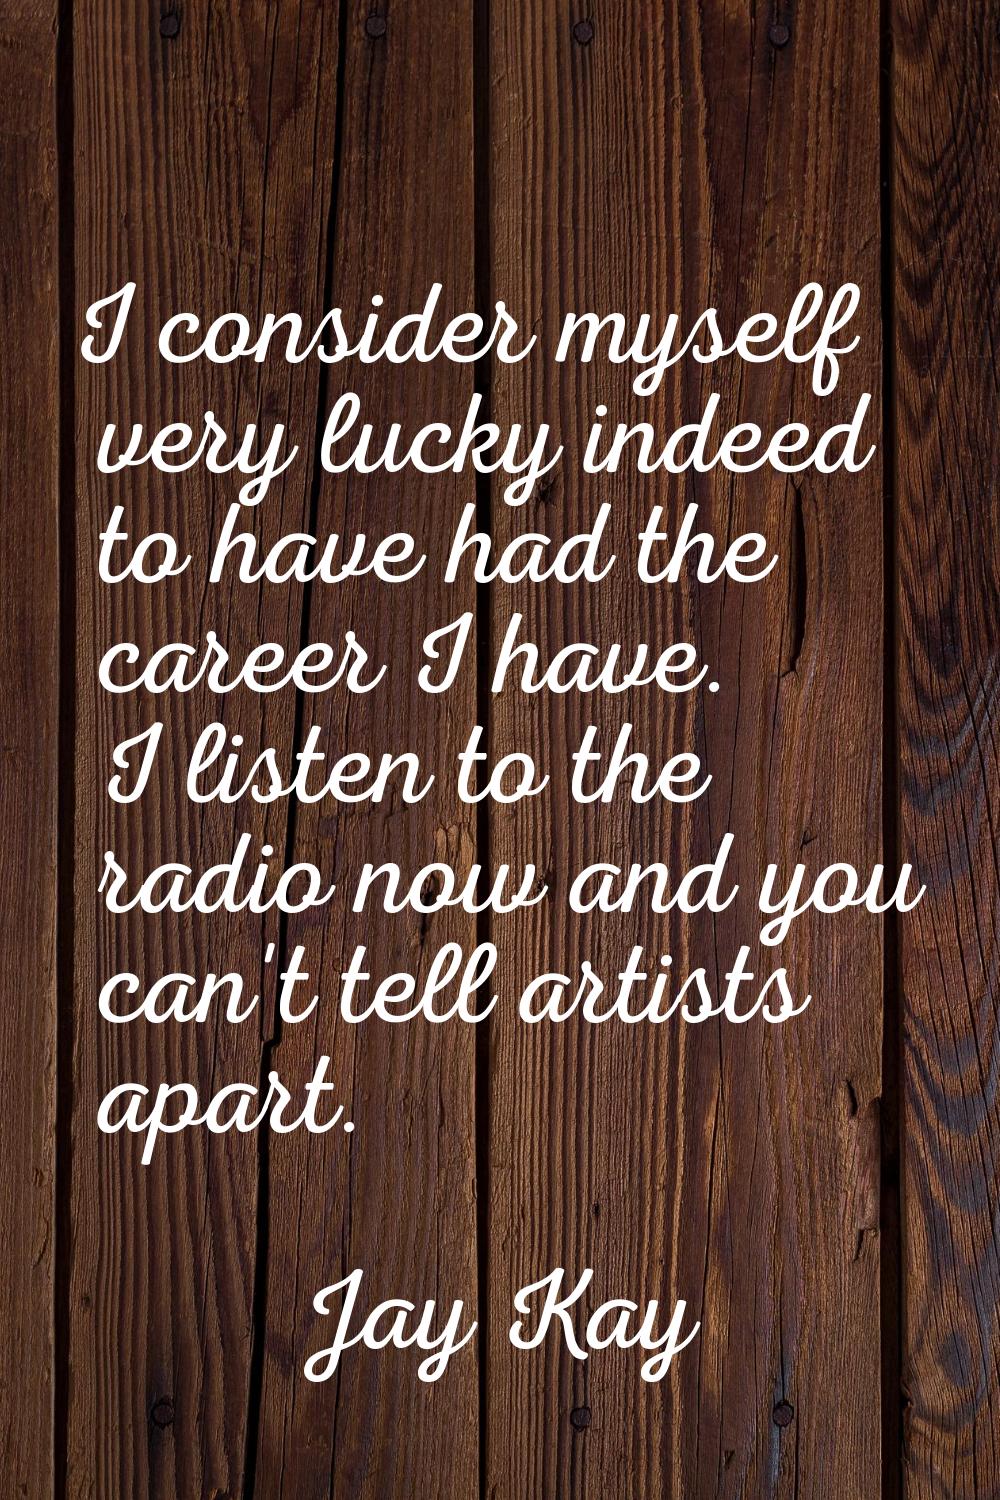 I consider myself very lucky indeed to have had the career I have. I listen to the radio now and yo